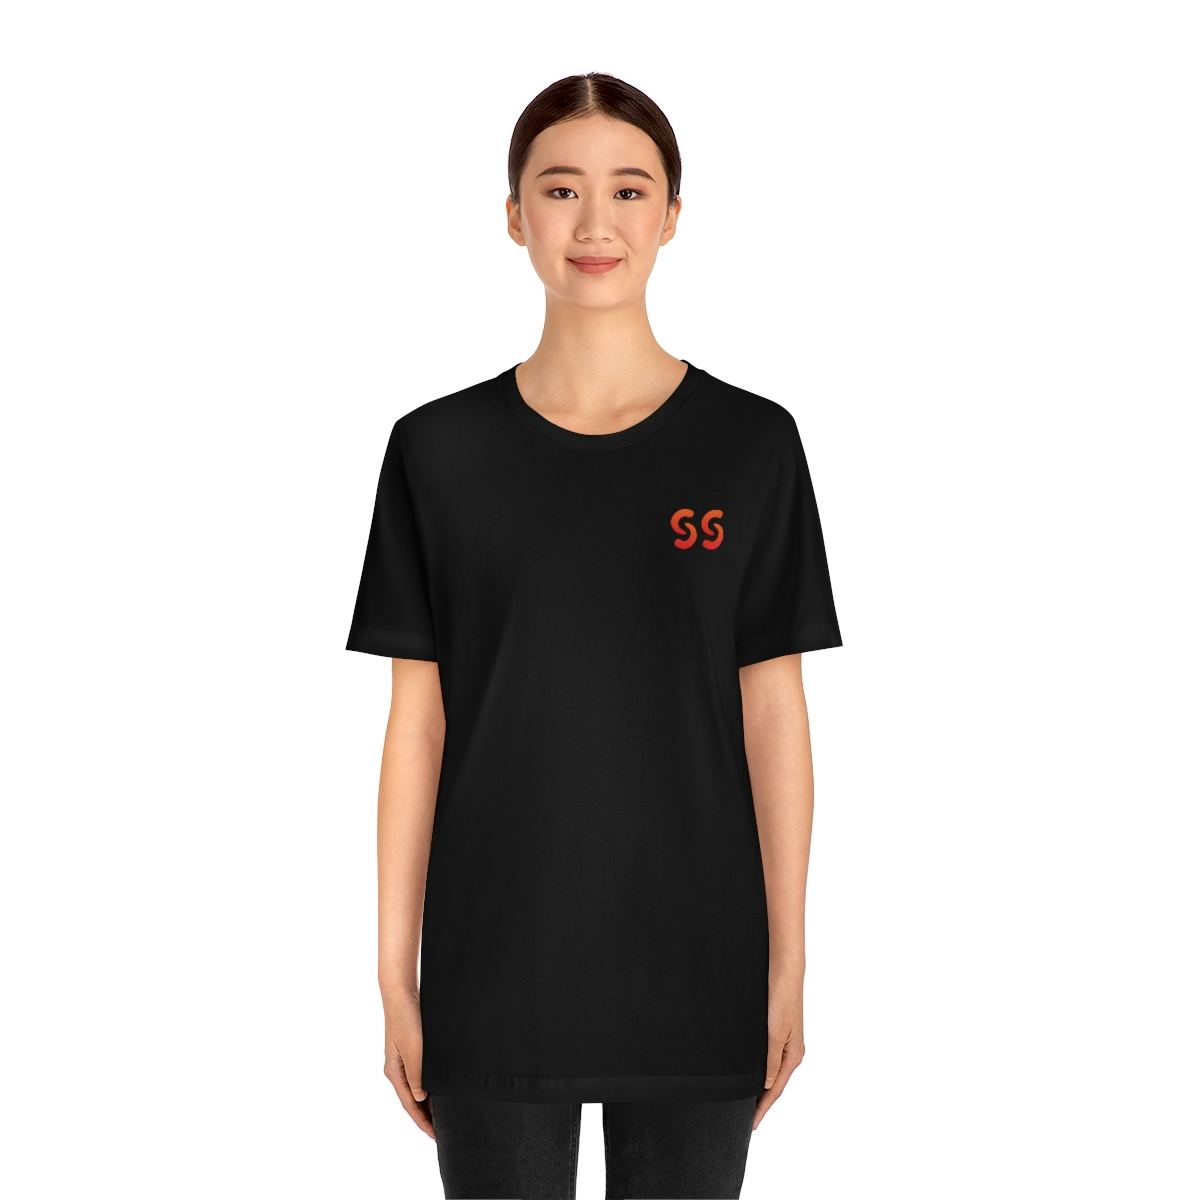 A young light skin tone female model wearing a black t-shirt with stylized "SS" over the left breast denoting sickle cell trait status.